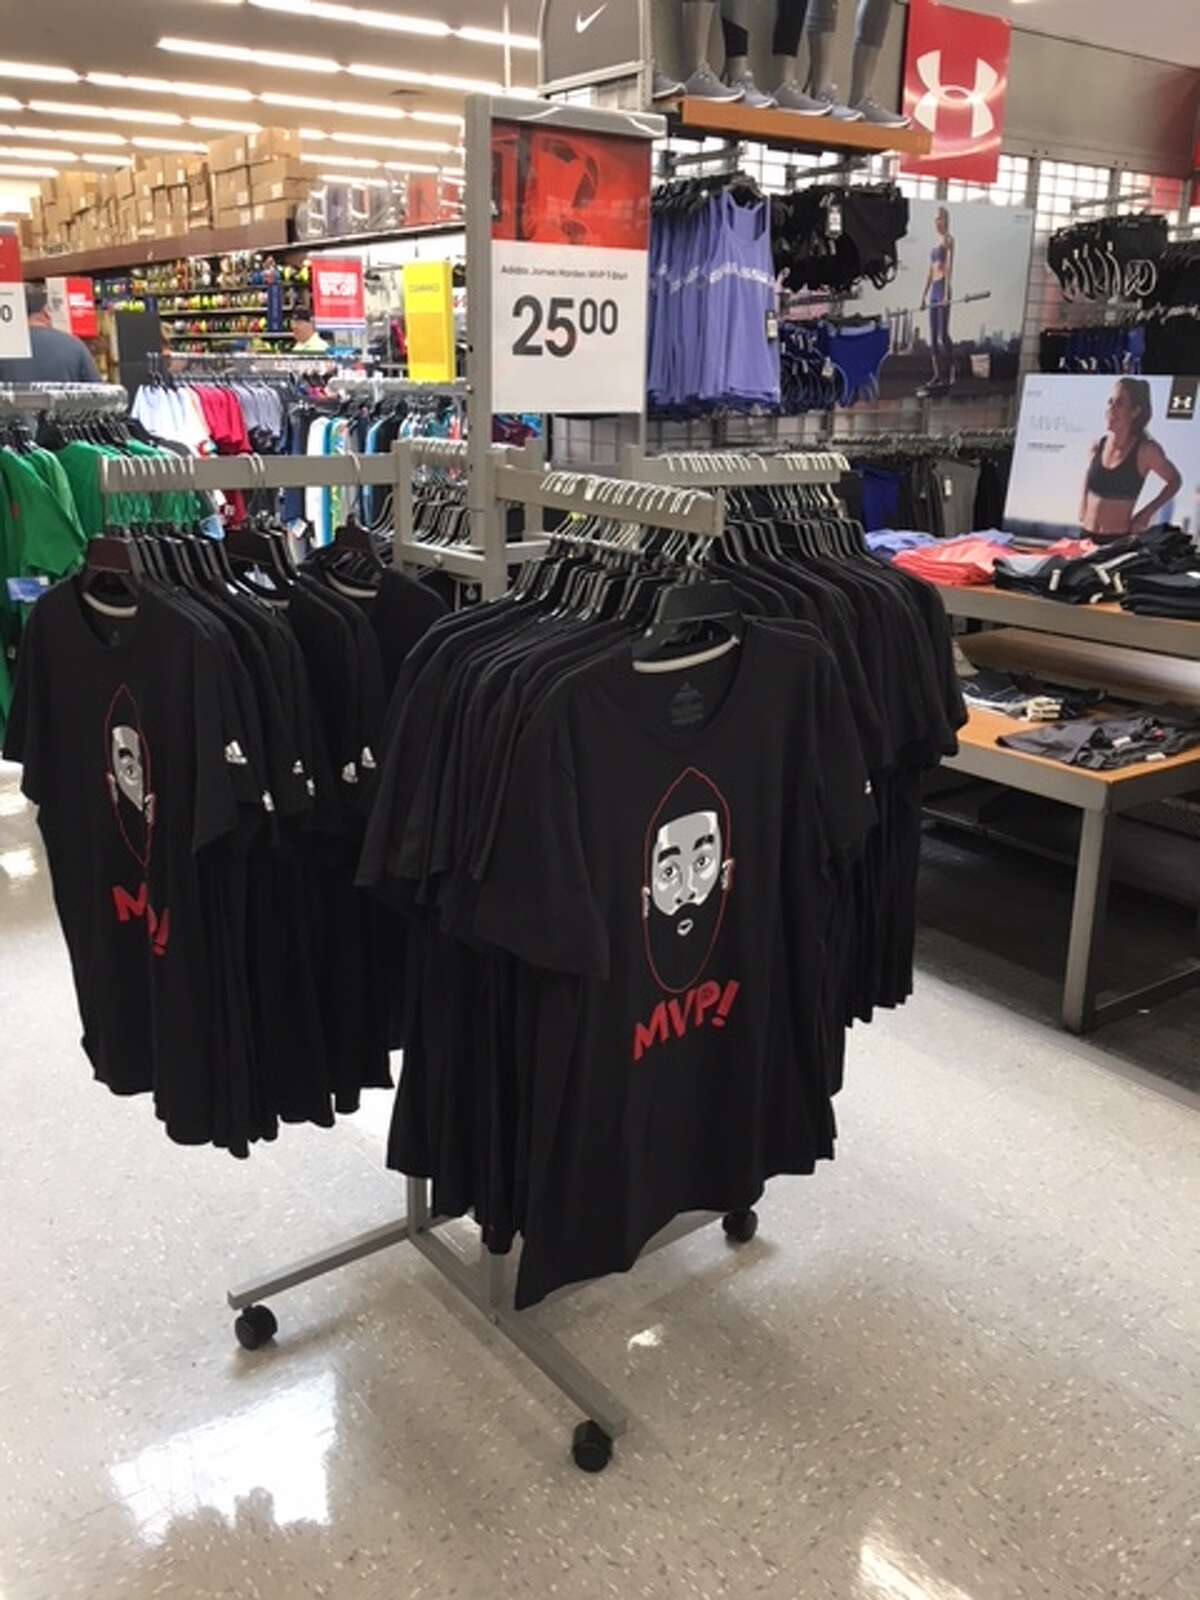 Academy Sports + Outdoors Store Uvalde Rd